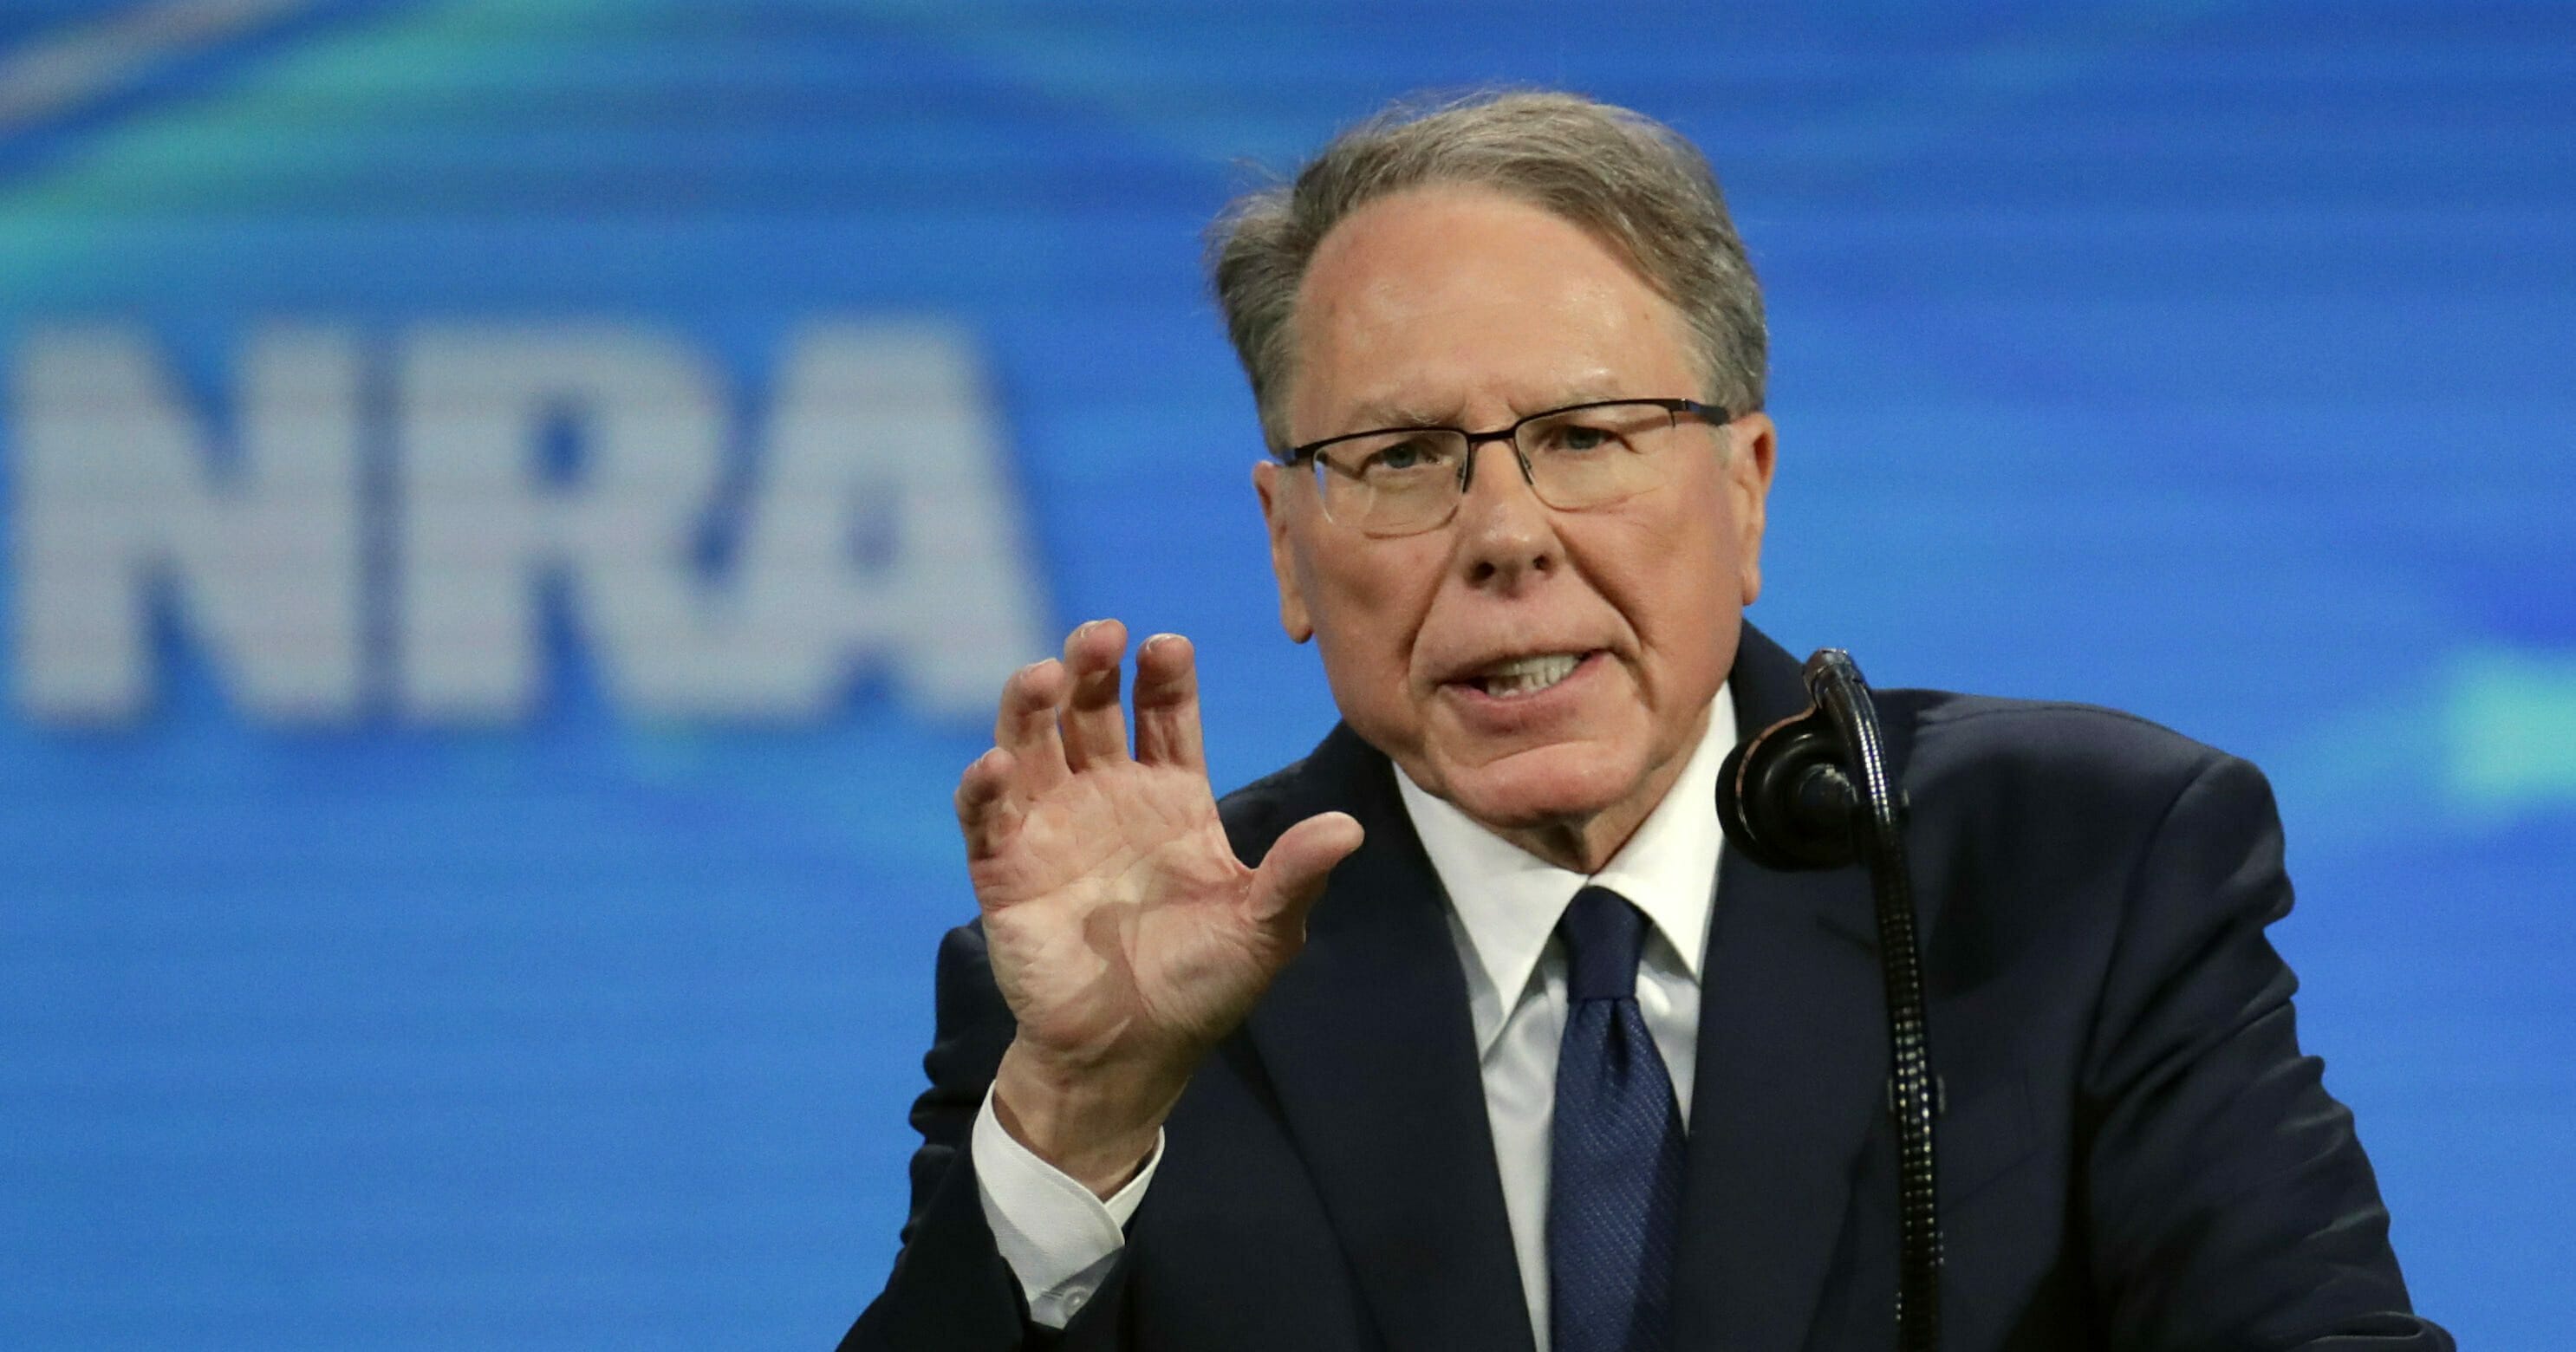 National Rifle Association Executive Vice President Wayne LaPierre speaks at the National Rifle Association Institute for Legislative Action Leadership Forum in Lucas Oil Stadium in Indianapolis, Indiana.